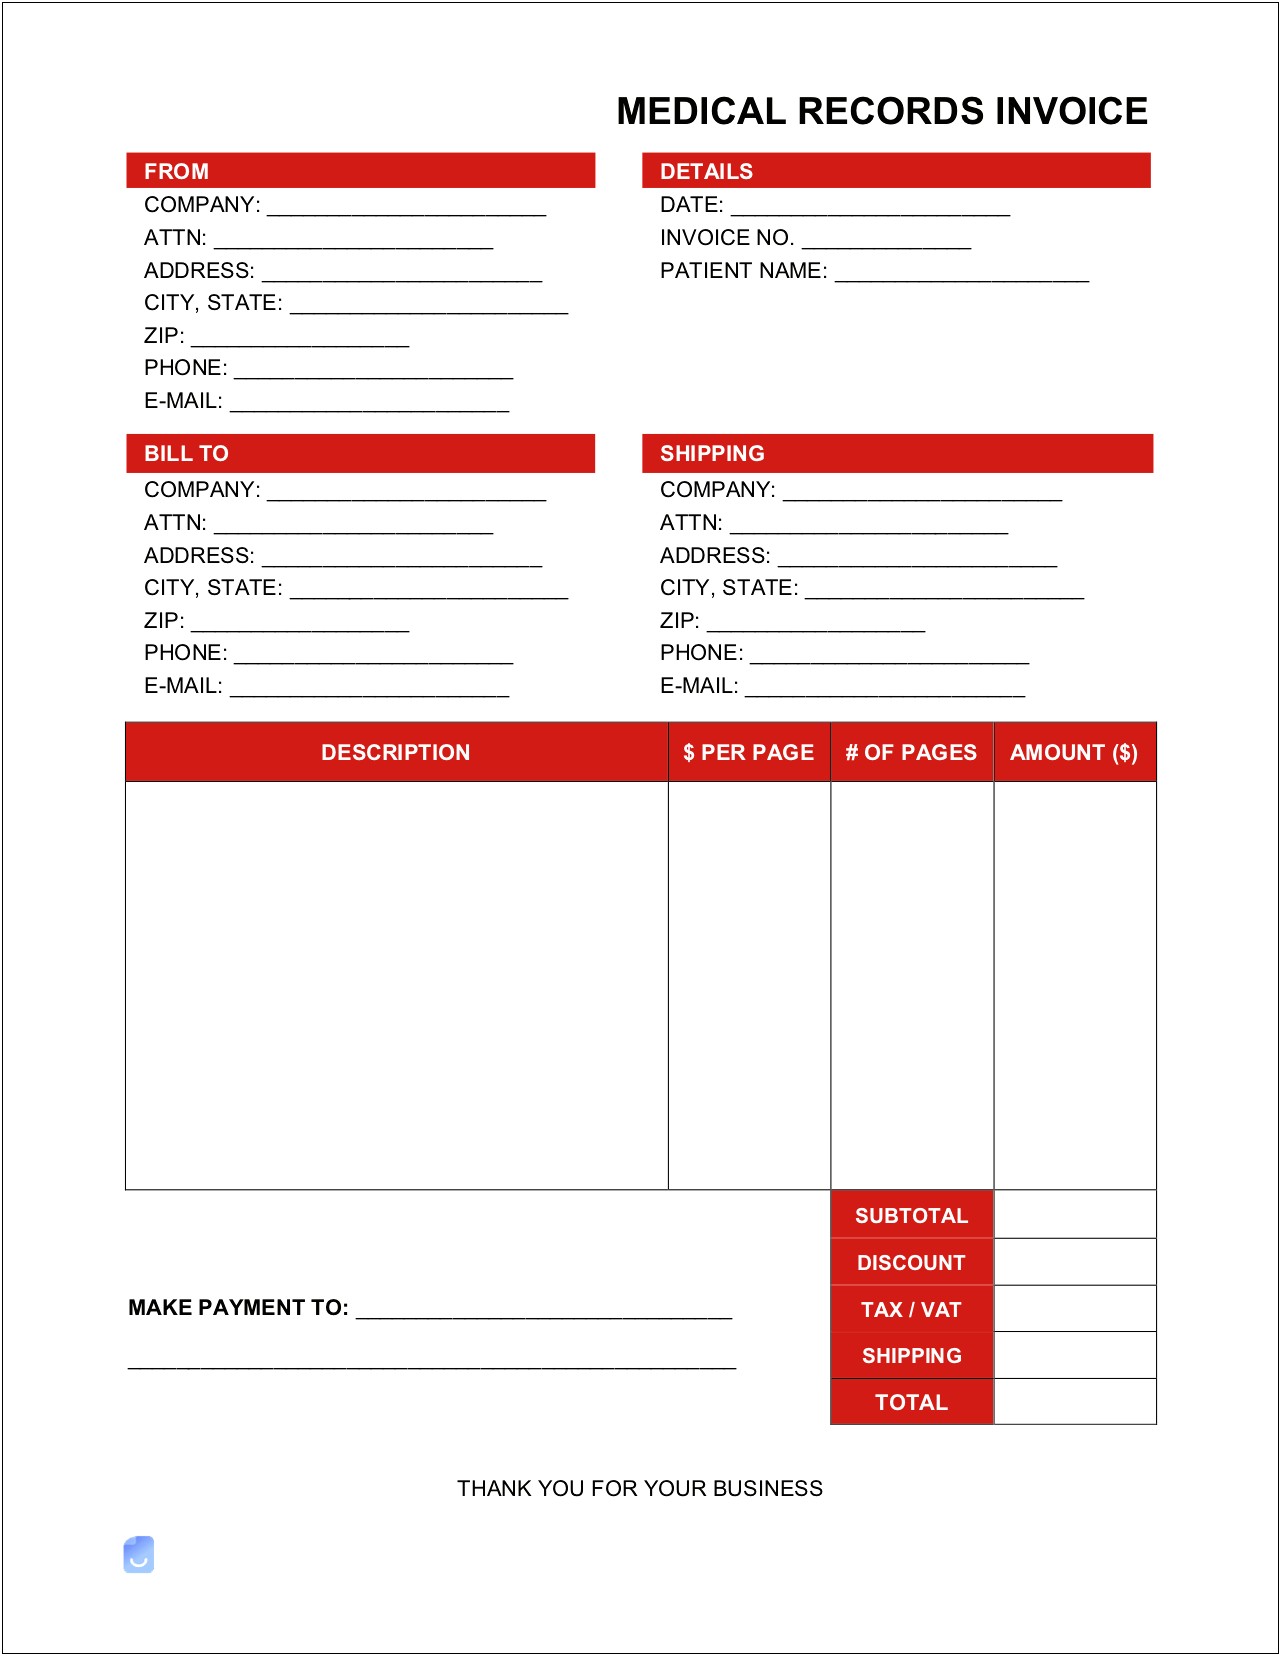 Doctor's Office Invoice Template Free